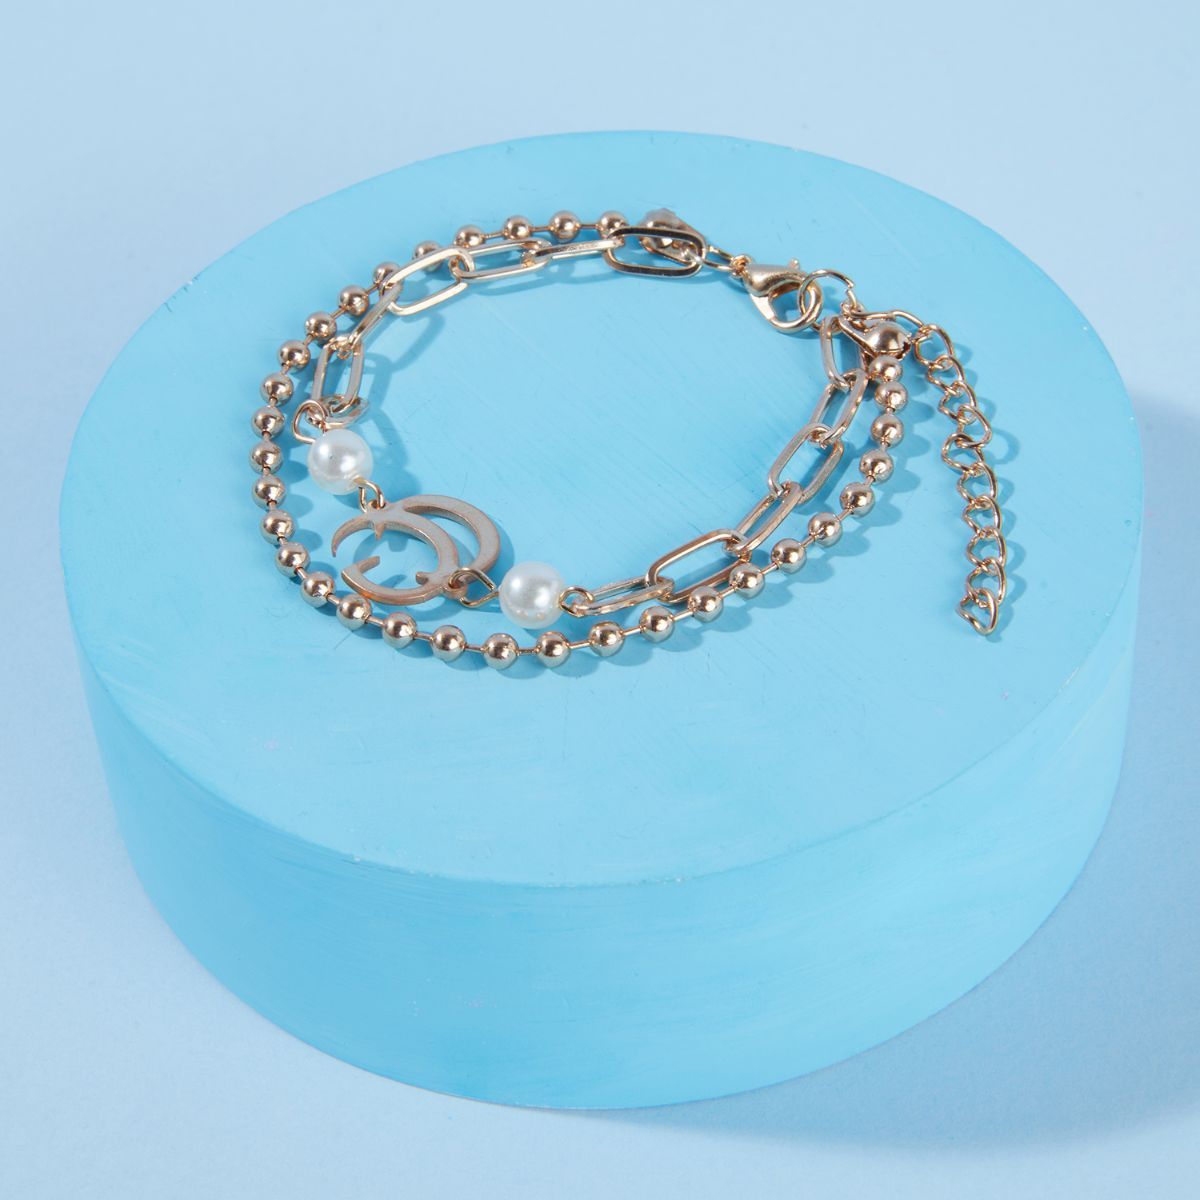 Pipa Bella by Nykaa Fashion Chic Set of 4 Copper Plated Bracelet Stack –  www.pipabella.com